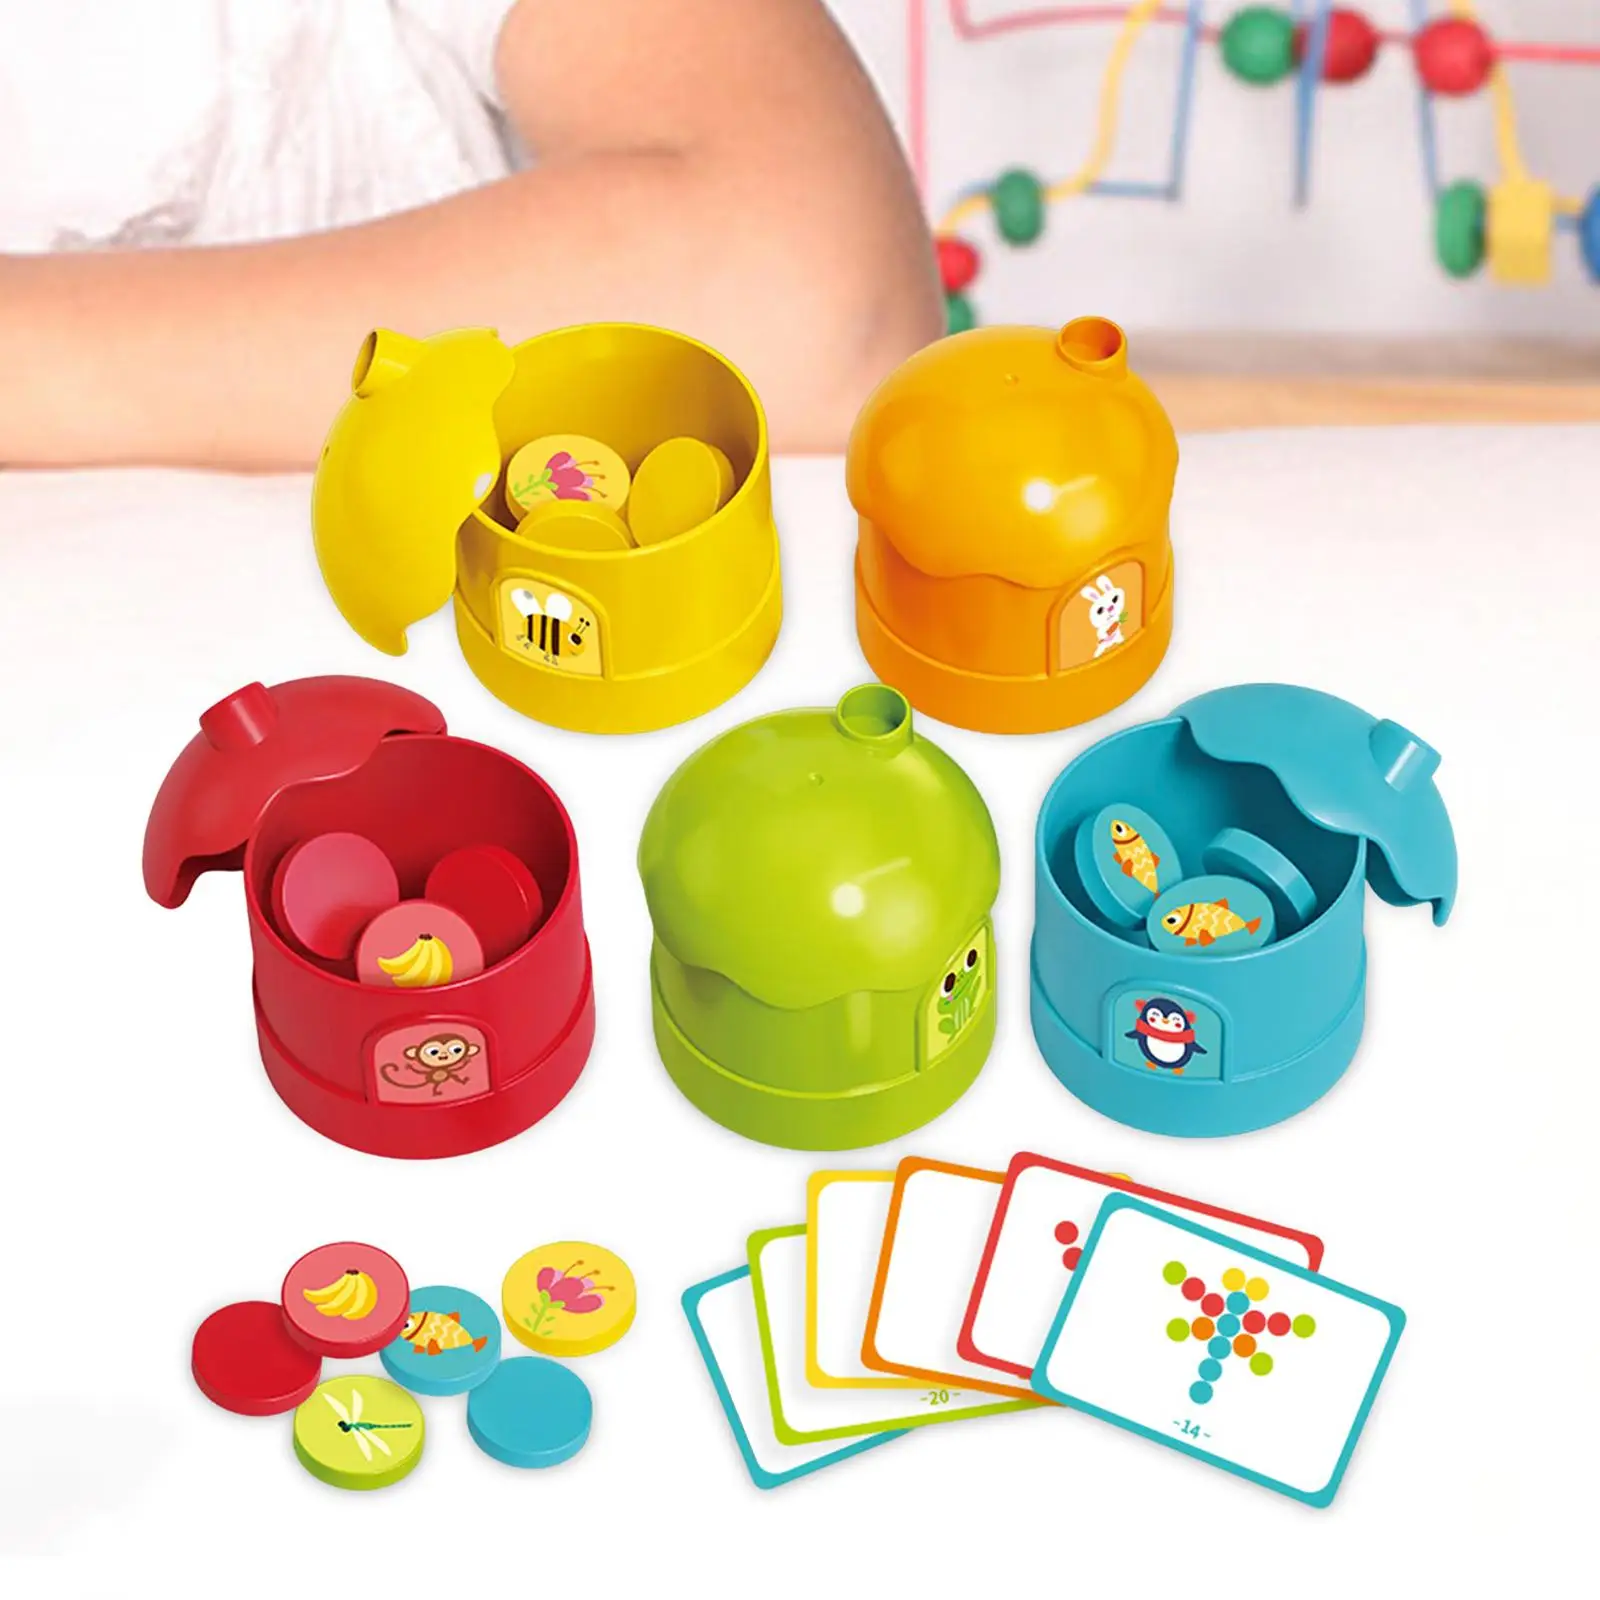 Sorting Cup Classified Toys Cognitive Multipurpose for Learning Activities